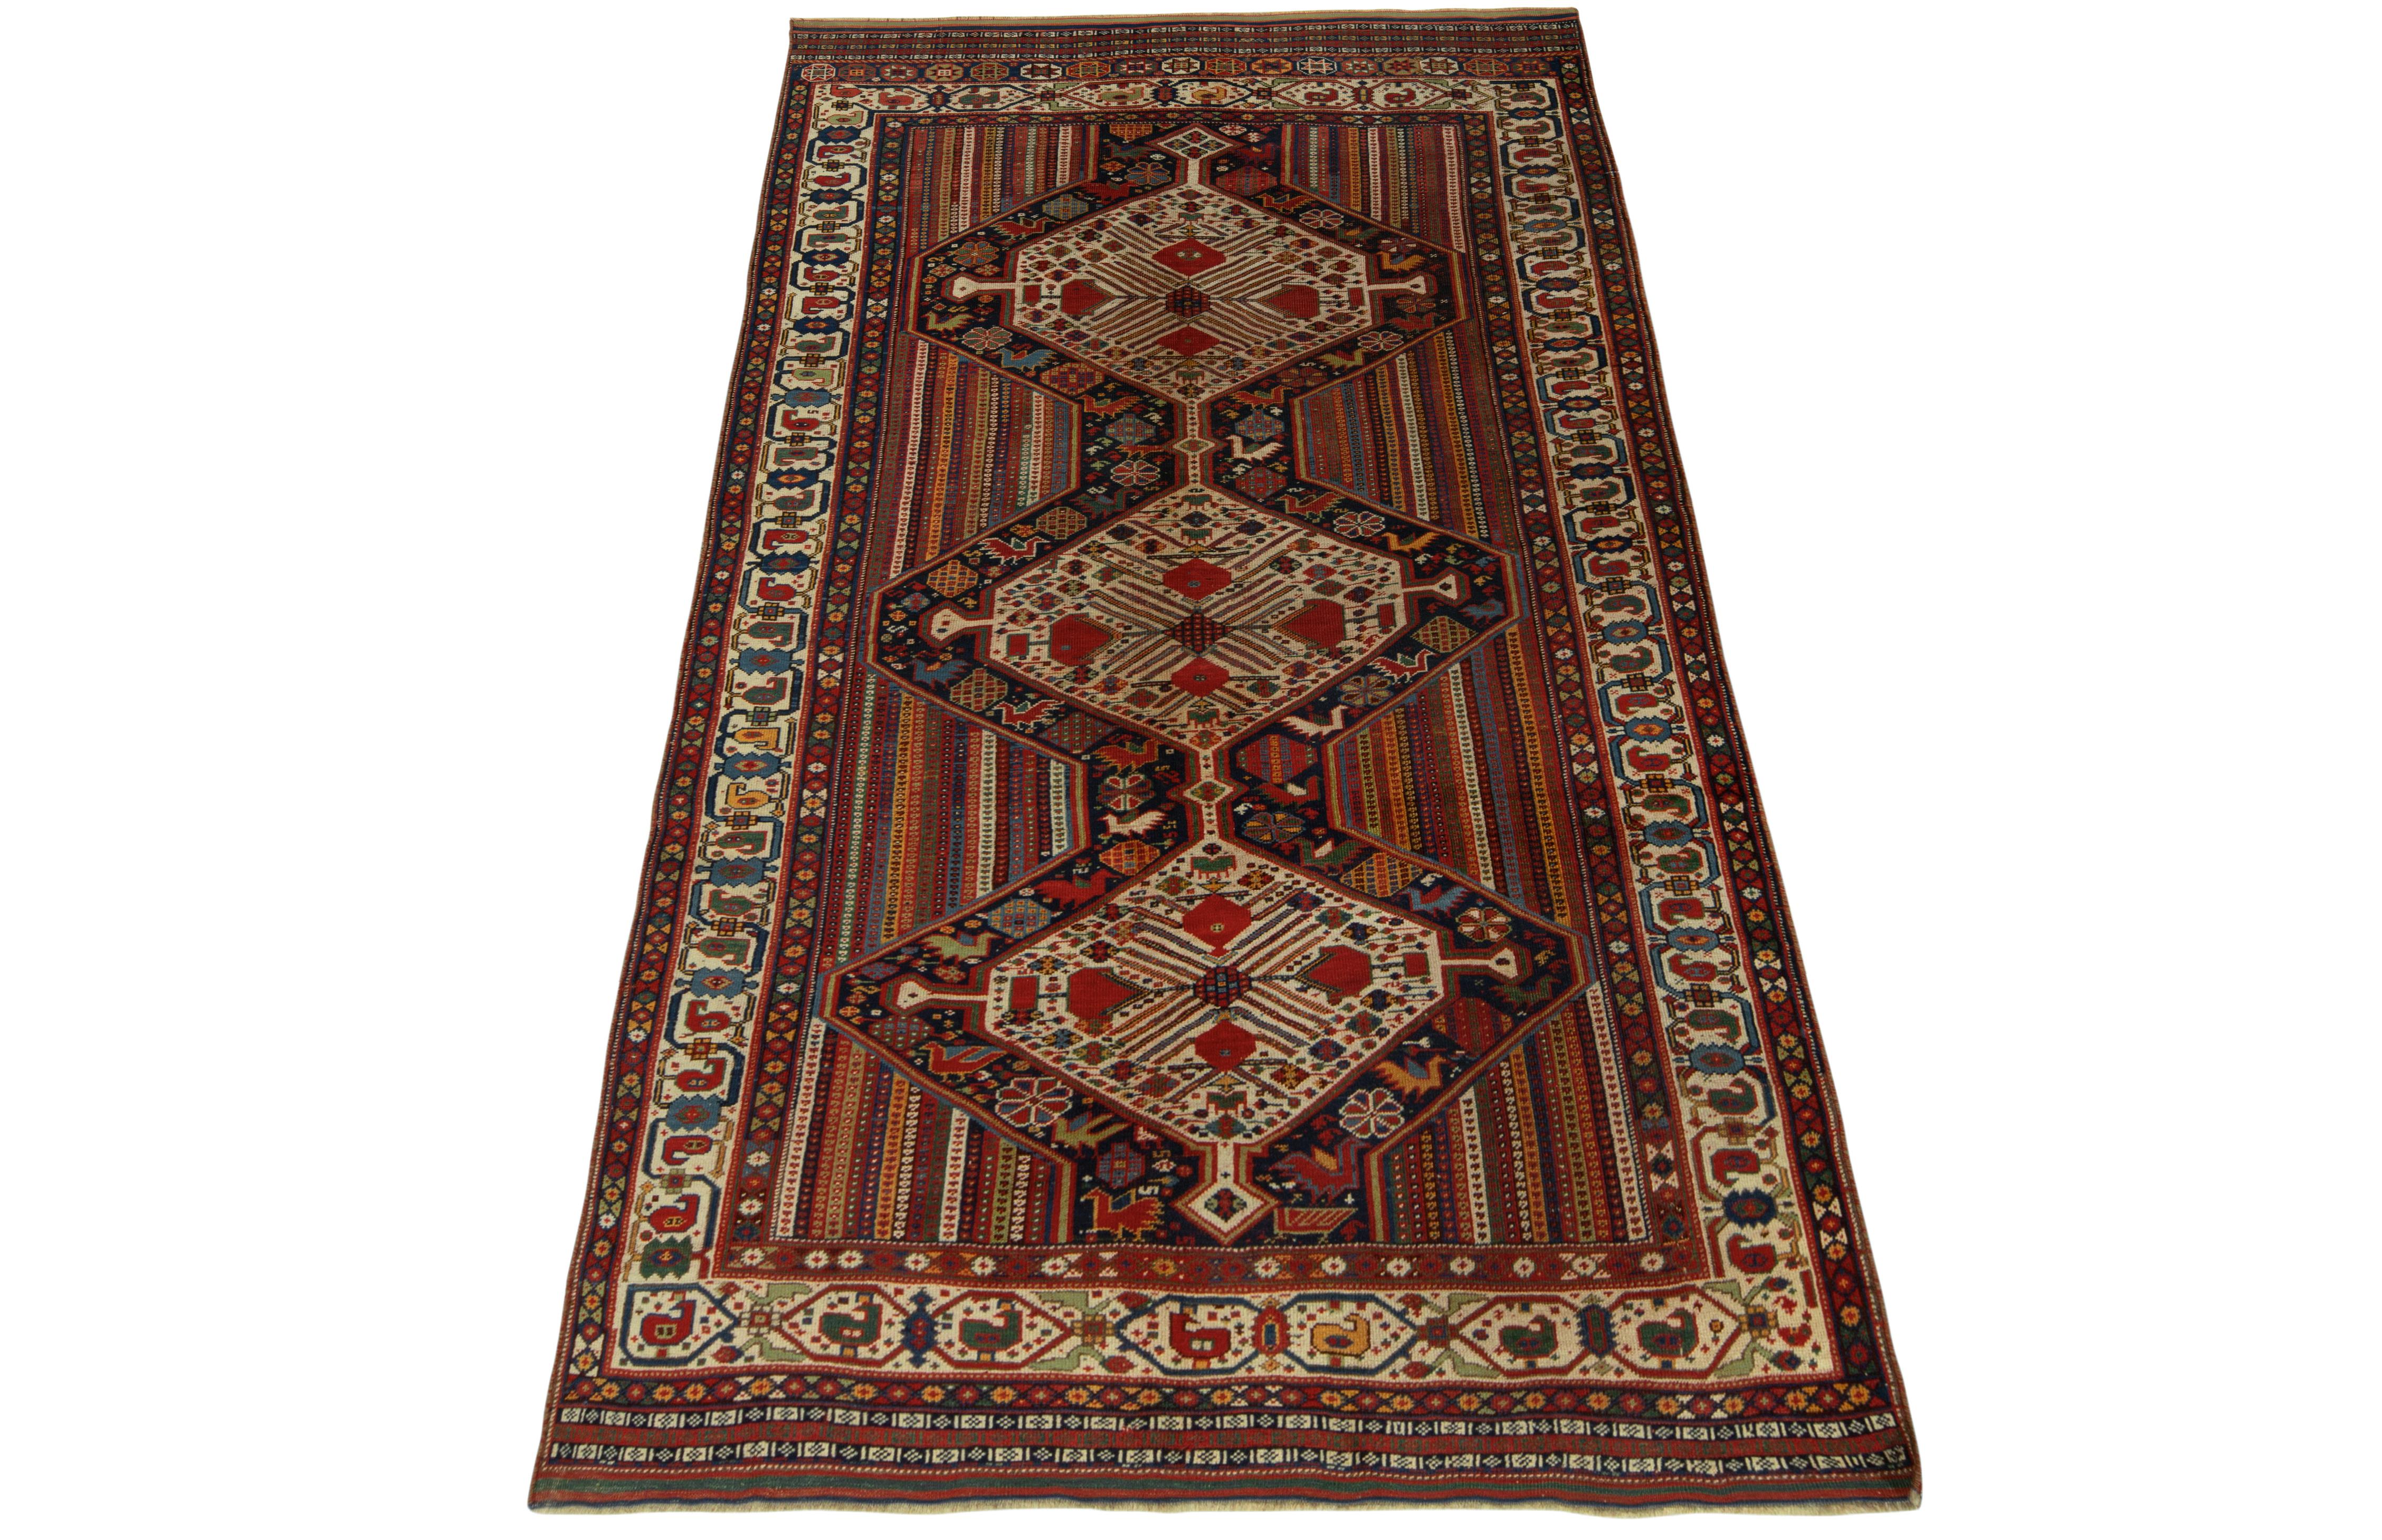 Hand-knotted in fine wool, an antique Qashqai rug from Persia circa 1920-1930 joining Rug & Kilim’s coveted Antique & Vintage collection. Celebrating fine aesthetics of a reputed Iranian workshop, the 5x9 collectible features diamond medallions with